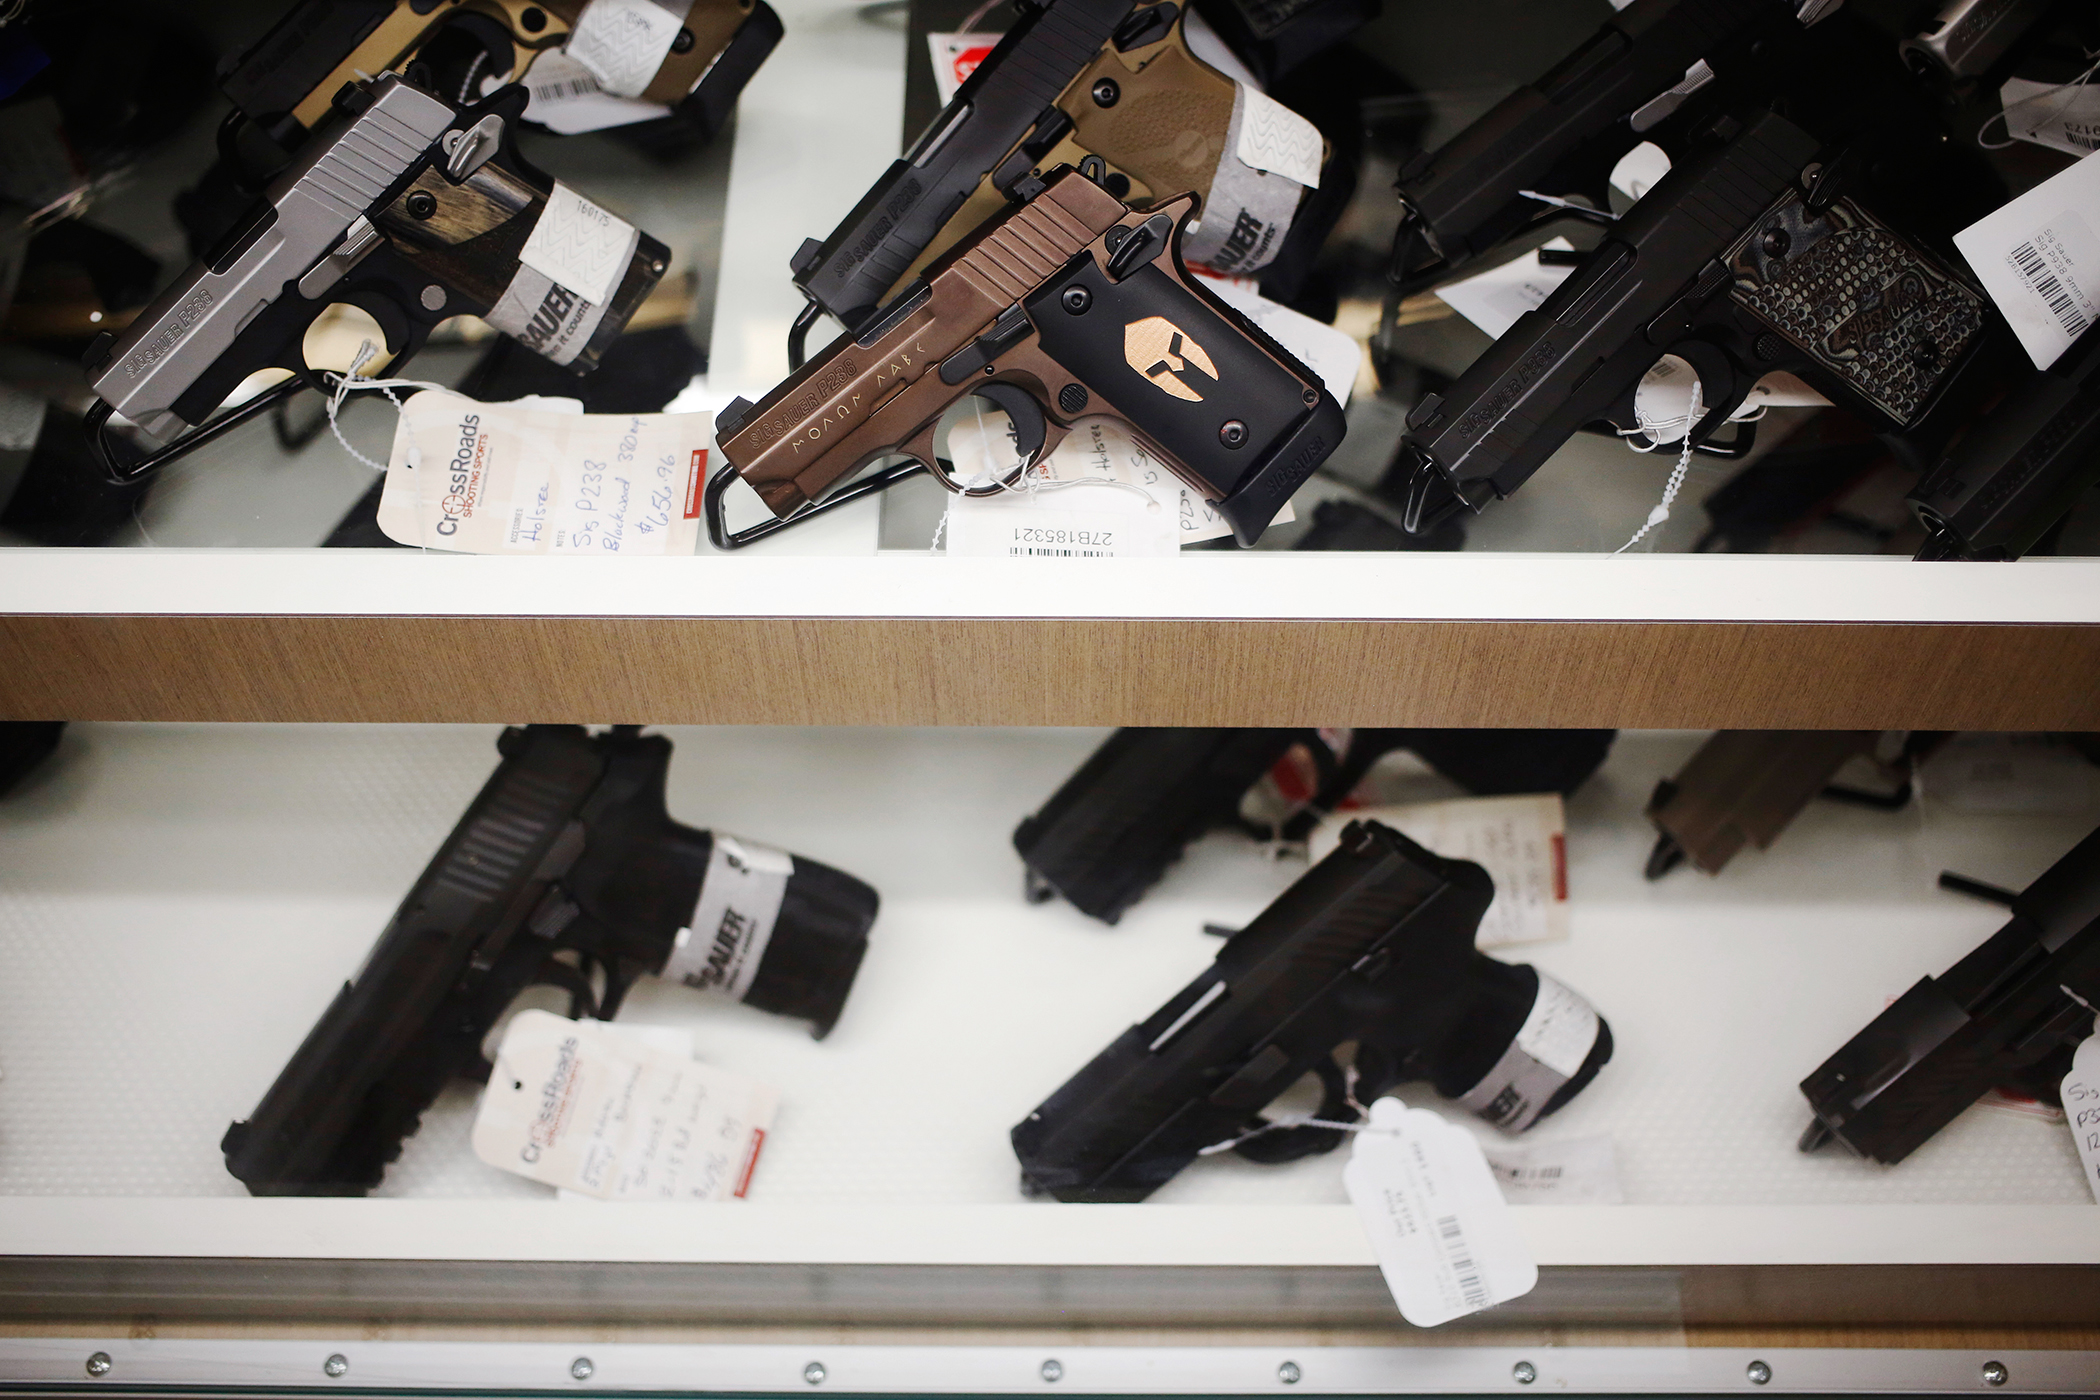 Handguns manufactured by SIG Sauer GmbH are displayed for sale during a campaign event for Donald Trump, president and chief executive of Trump Organization Inc. and 2016 Republican presidential candidate, at CrossRoads Shooting Sports in Johnston, Iowa, U.S., on January 30, 2016.